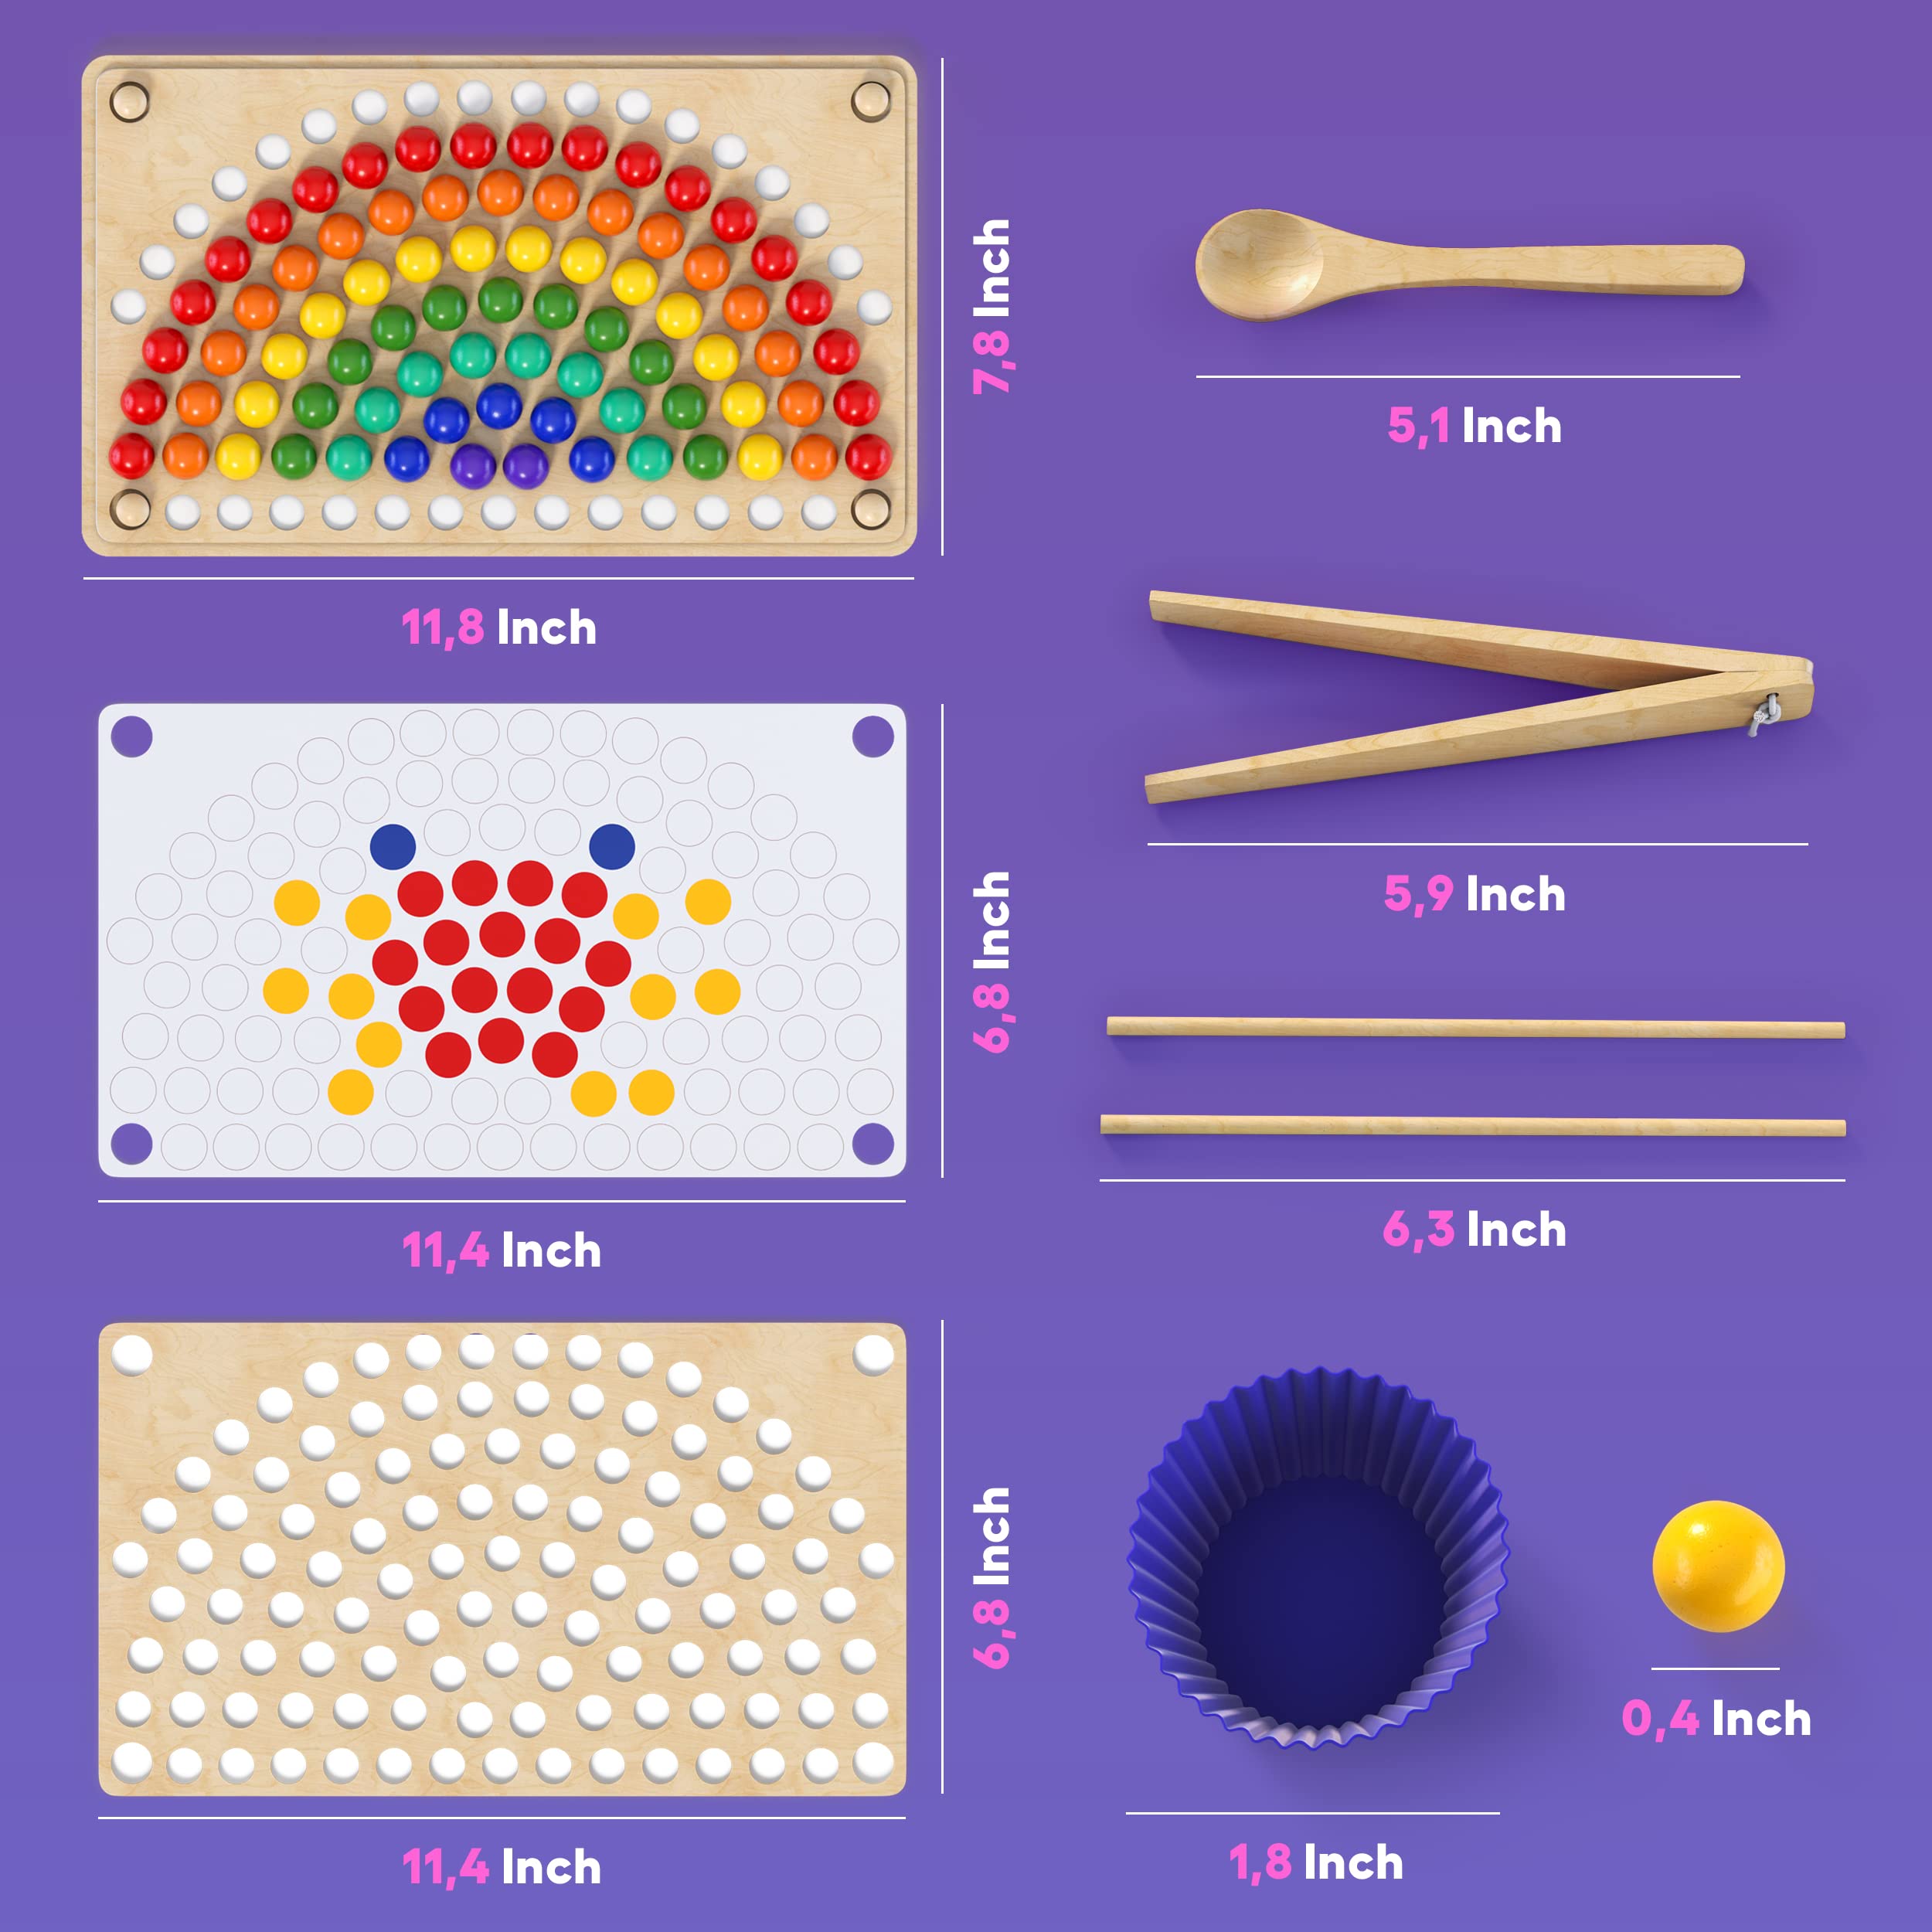 Toddler wooden Learning Montessori toys – wooden peg board bead game baby rainbow stacking matching counting color sorting games for fine motor math skills boys and girls for 3 4 5 years old